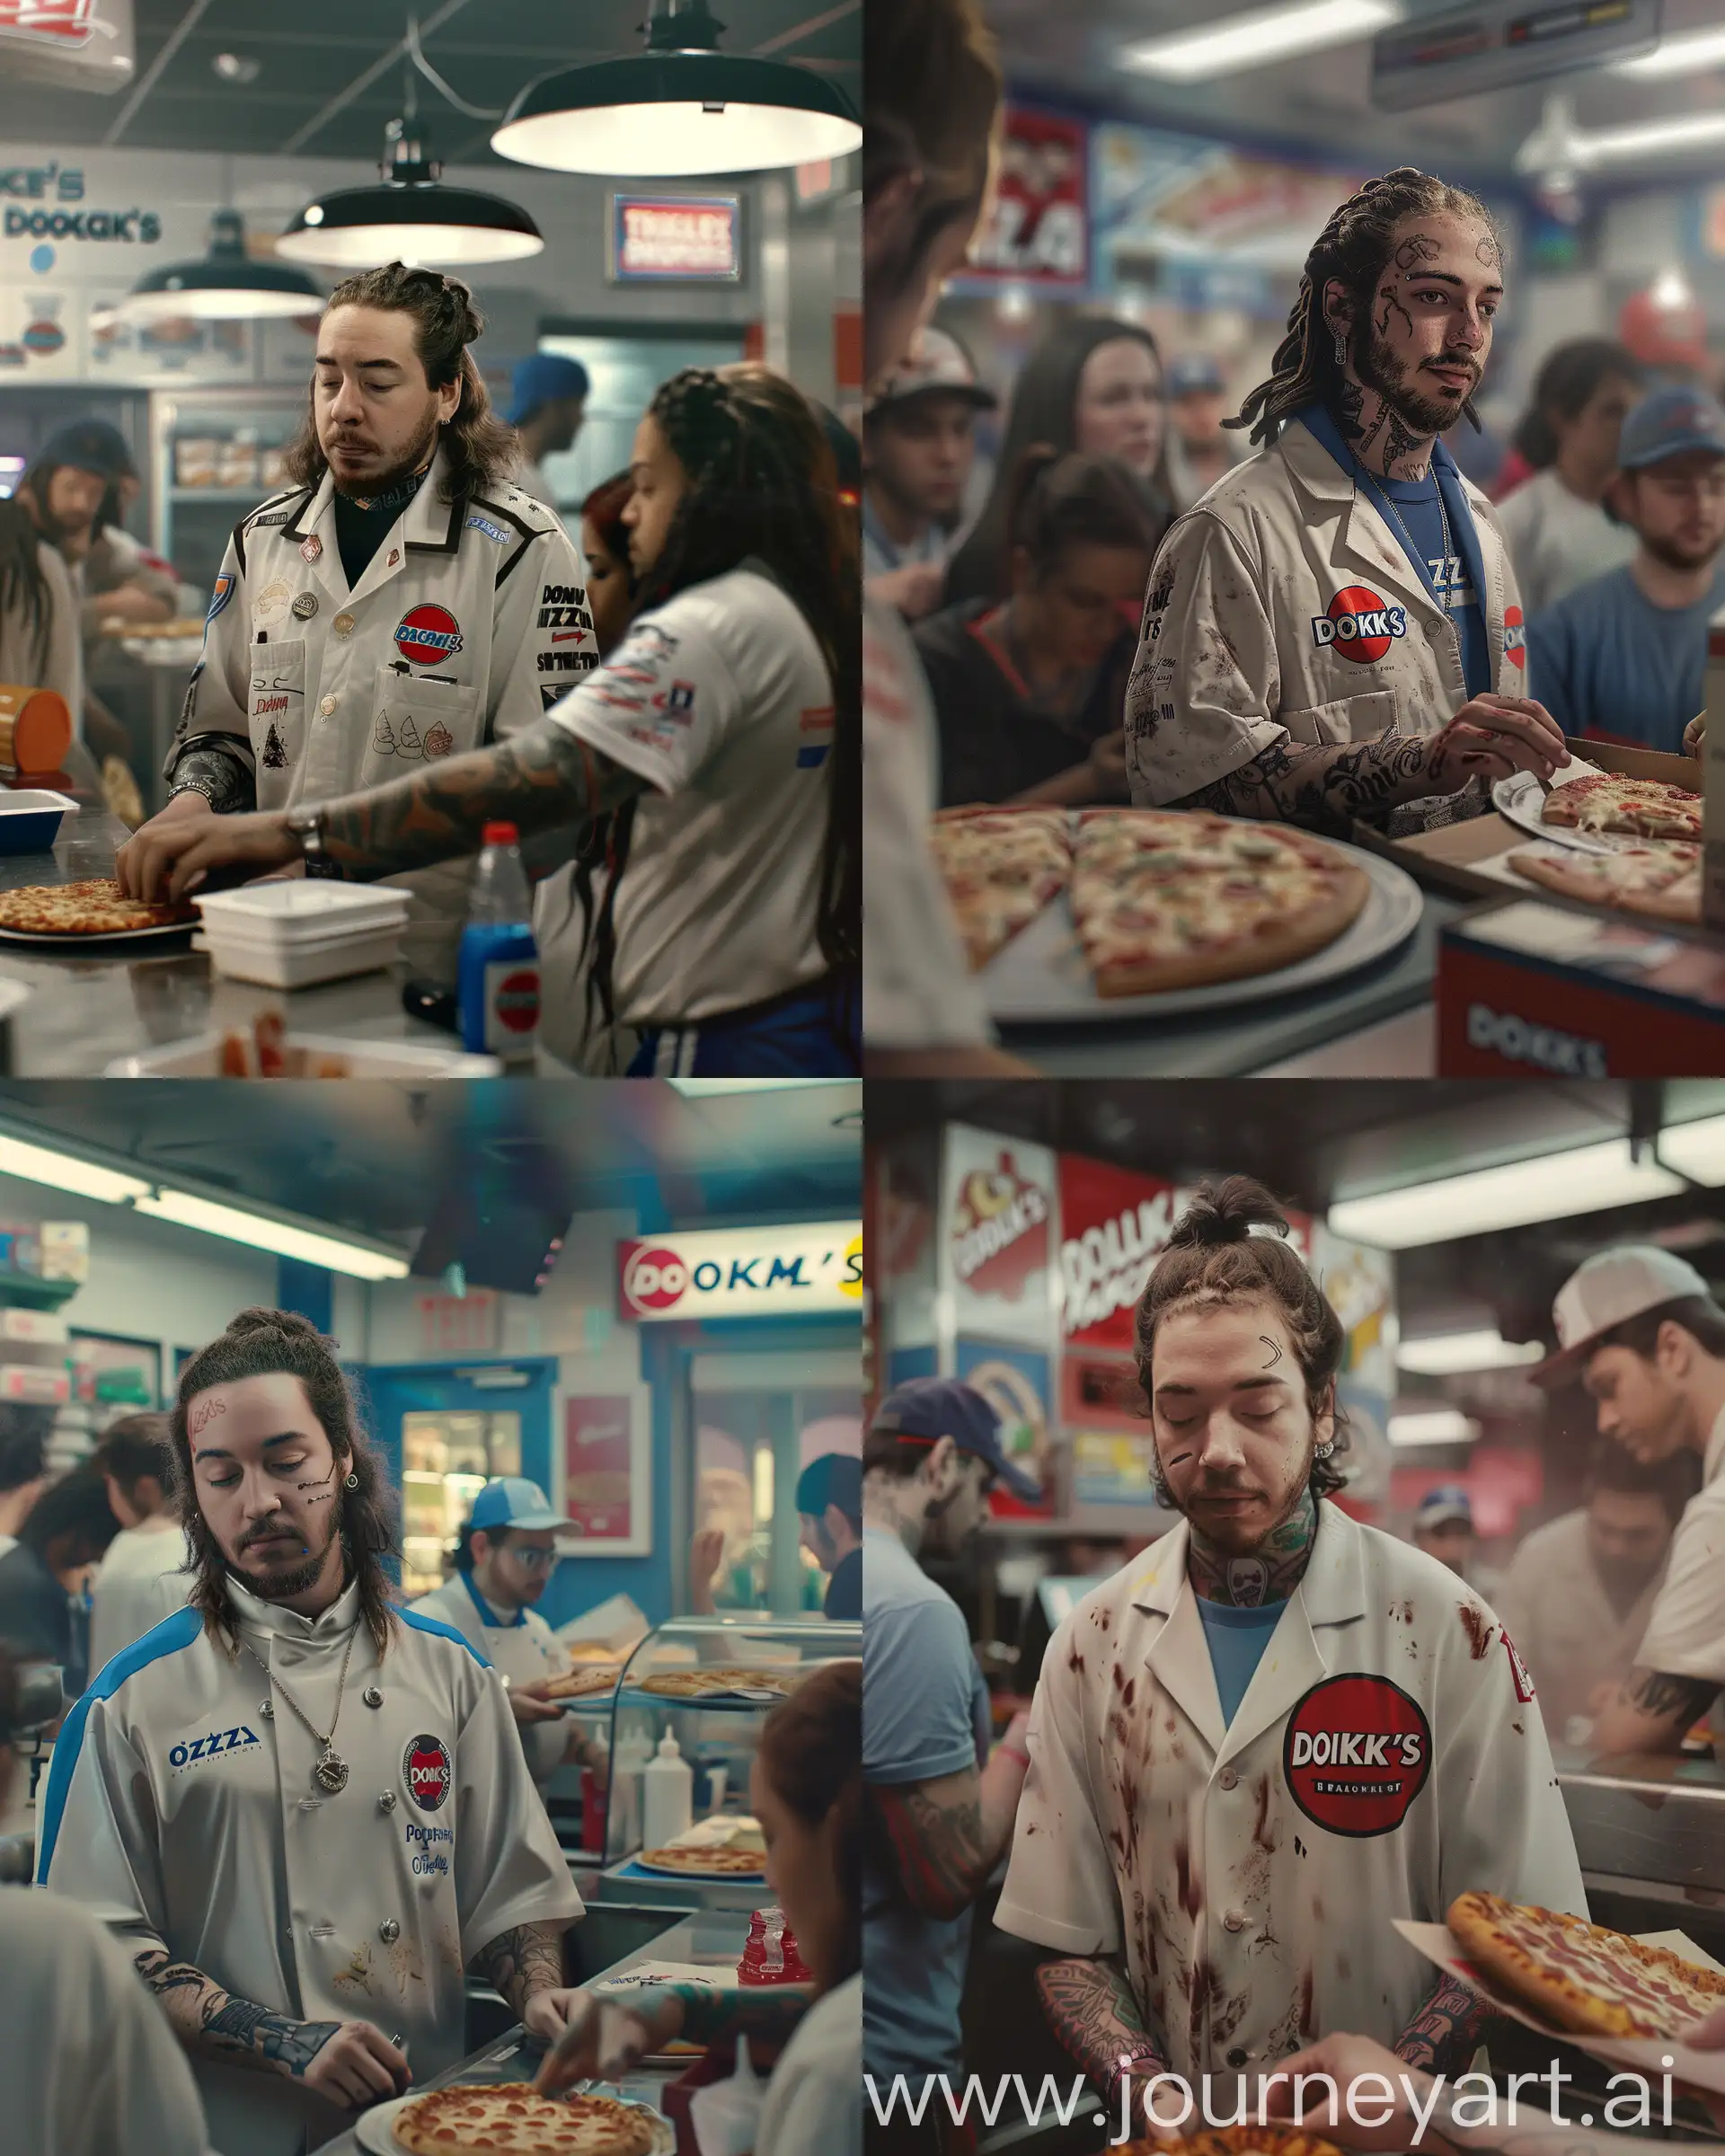 The-Post-Malone-Serving-Dominos-Pizza-in-a-Busy-Fast-Food-Restaurant